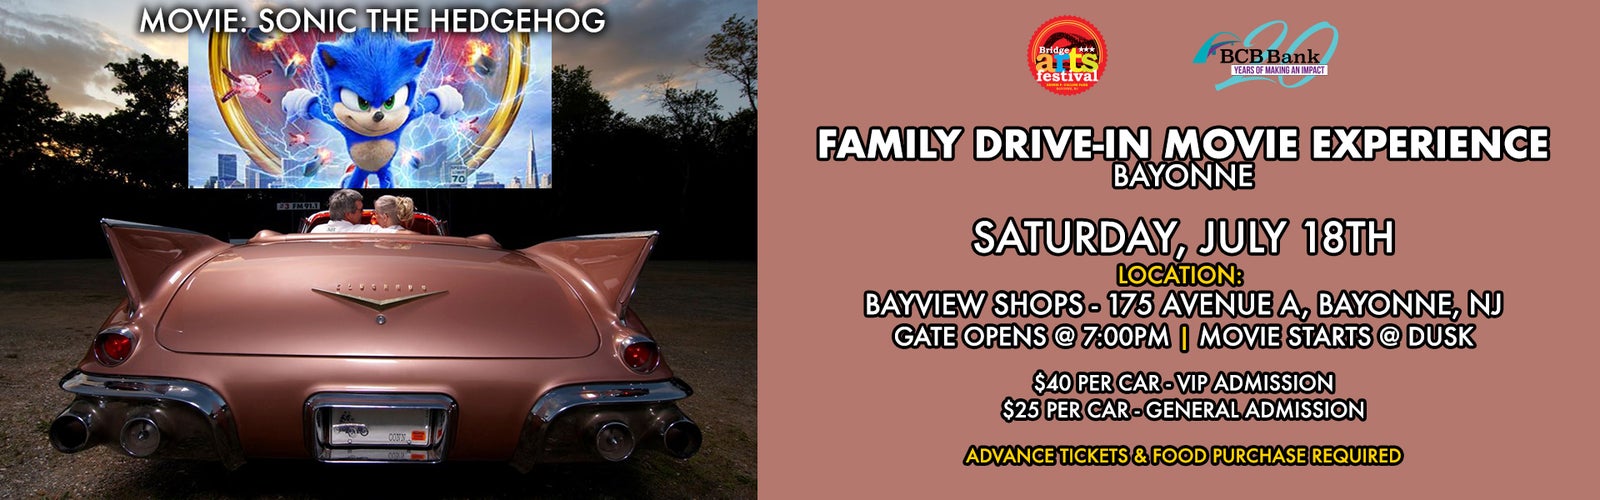 Banner flyer for Family Drive-in Movie Experience bayonne; Saturday, July 18th; Location: Bayview Shops - 175 Avenue A, Bayonne, NJ Gate Opens @ 7PM Movie starts at dusk. $40 per car- VIP Admission, $25 per car-general admission